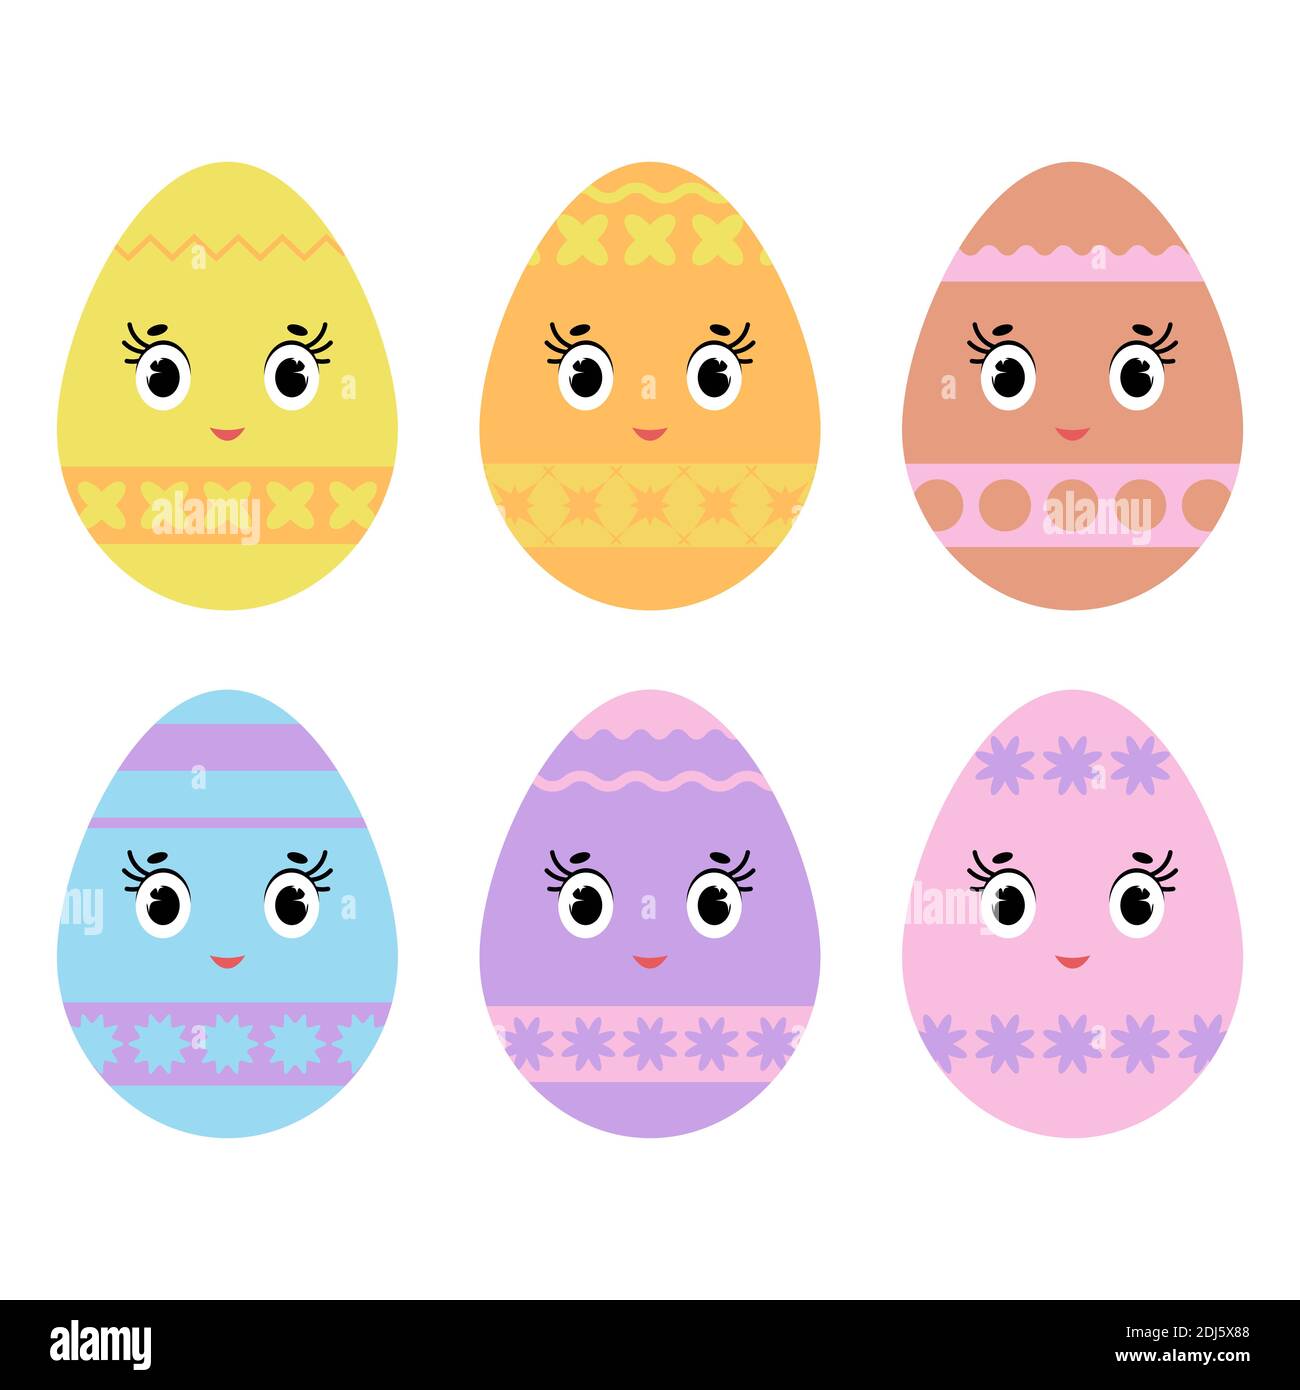 Simple colorful easter eggs illustration Cut Out Stock Images